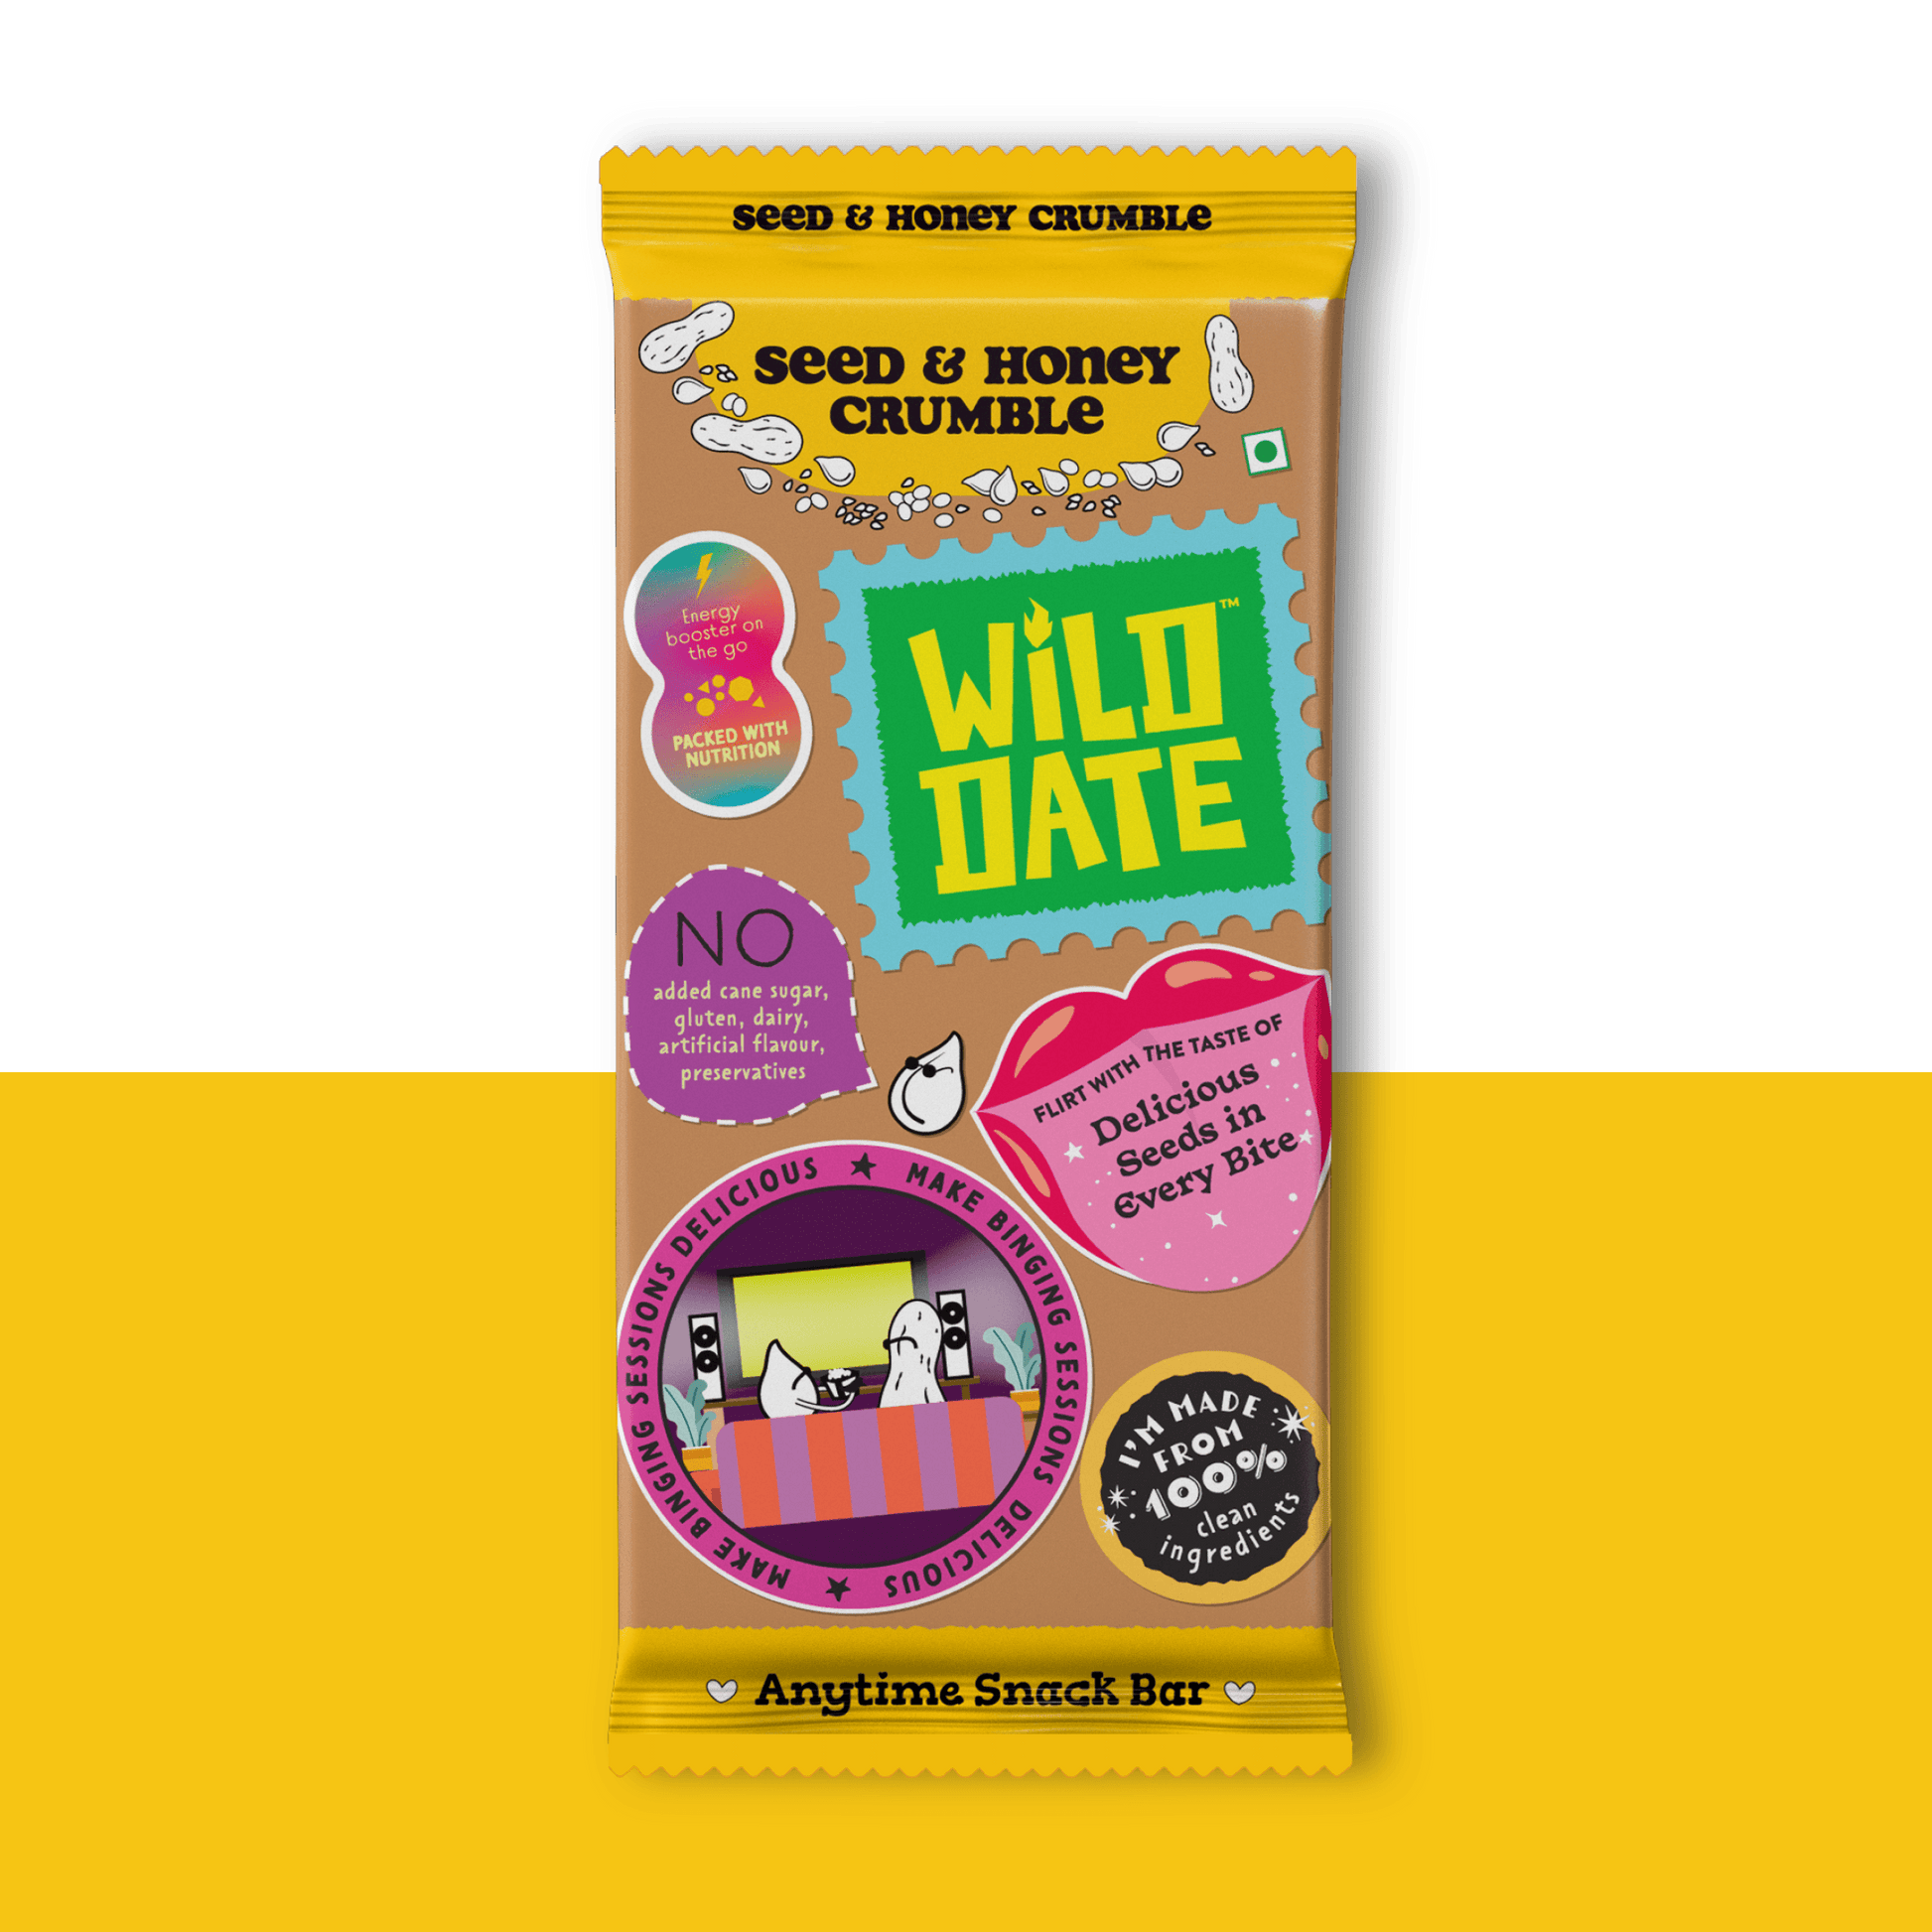 Wild Date snack bar assorted - Seed & honey crumble